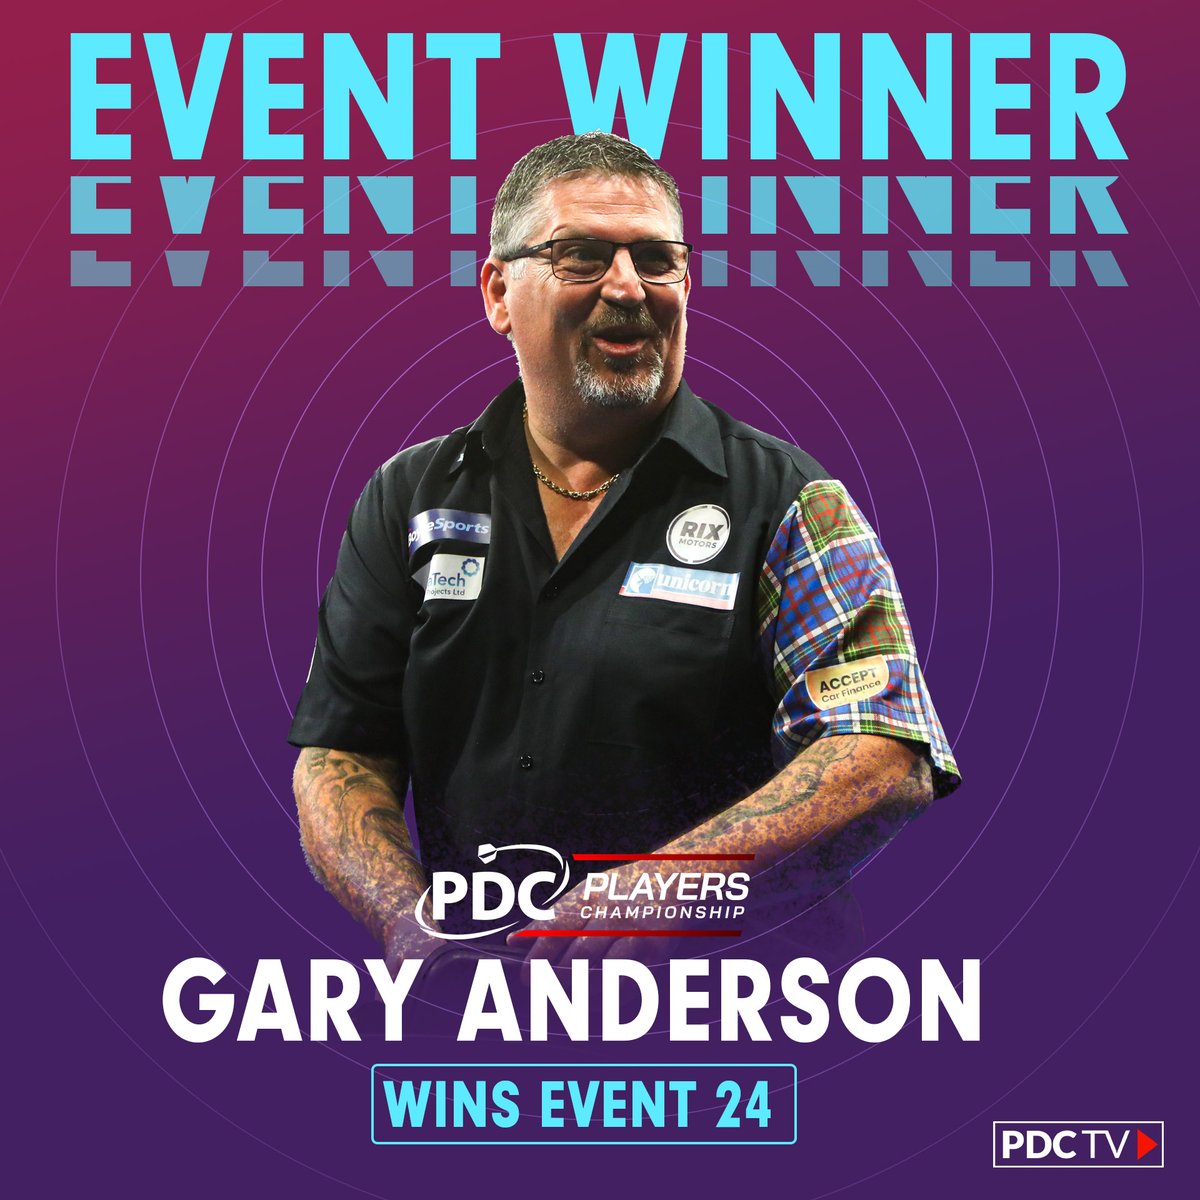 PC22 - Quarter-Finals
PC23 - Semi-Finals
PC24 - Winner 🏆

Gary Anderson has been getting better and better on the ProTour this week, and caps it with the title!